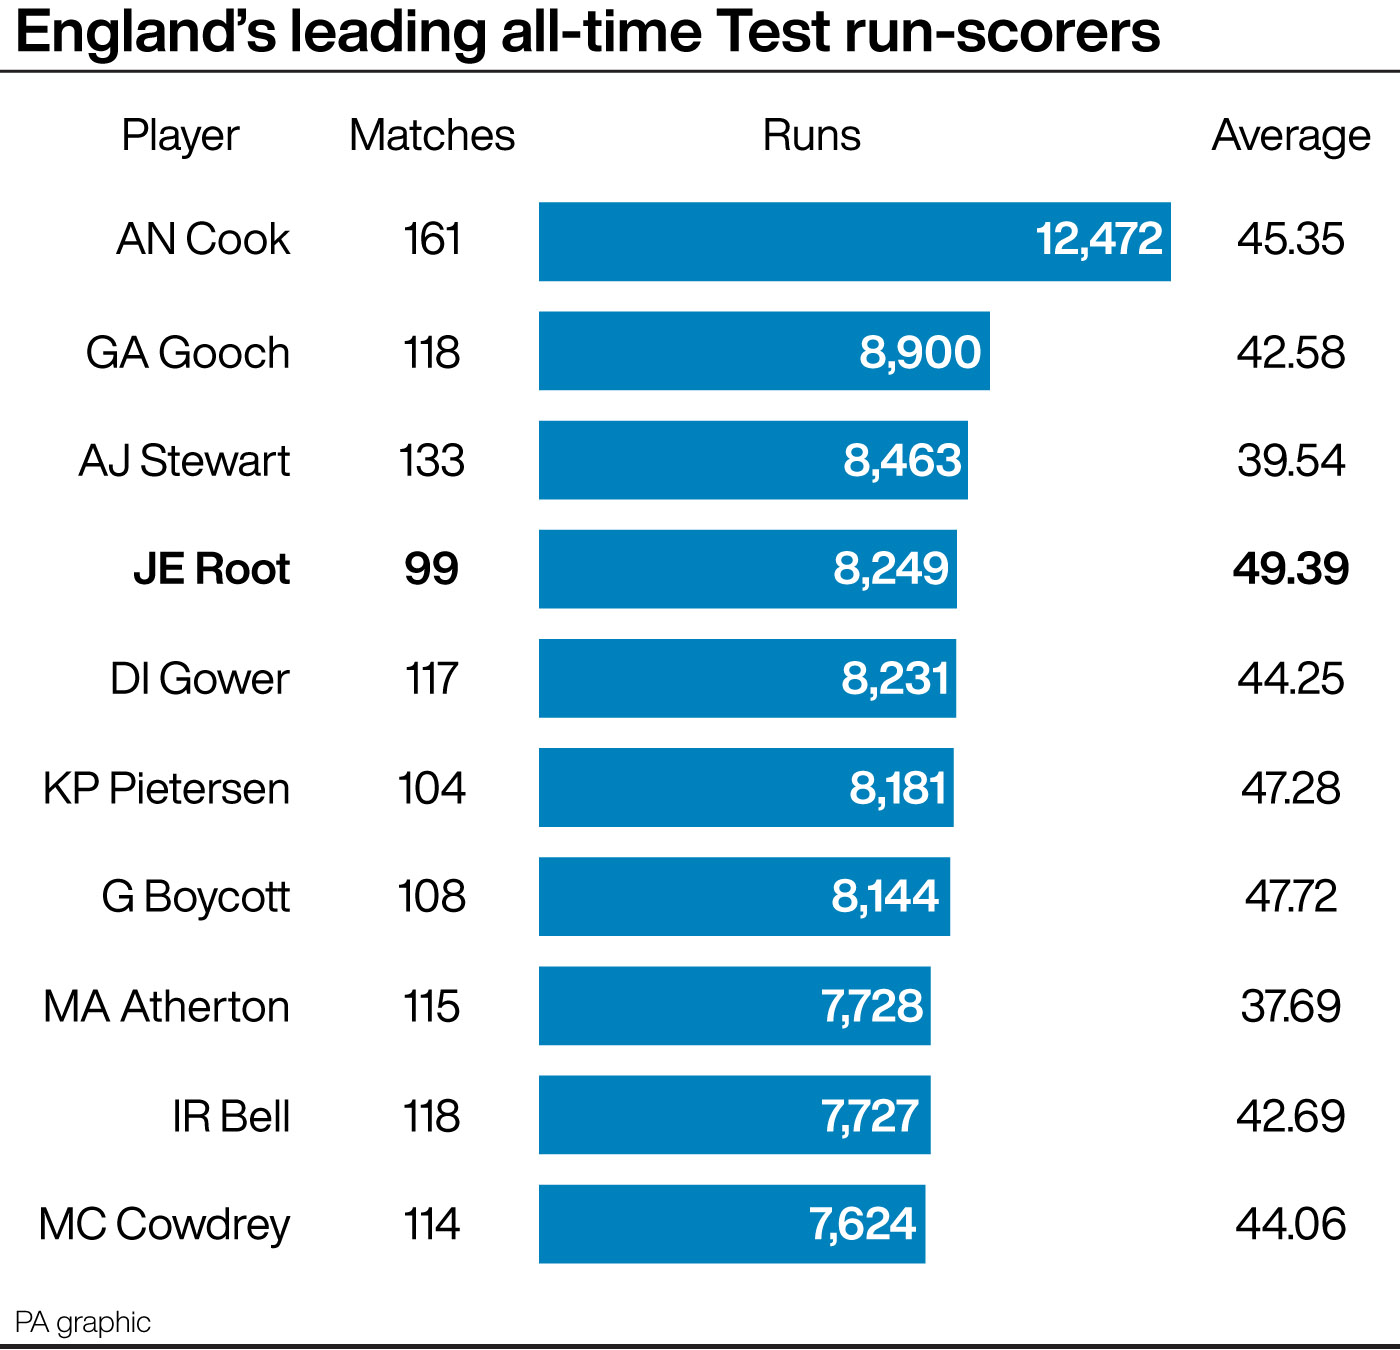 England's all-time leading Test run-scorers